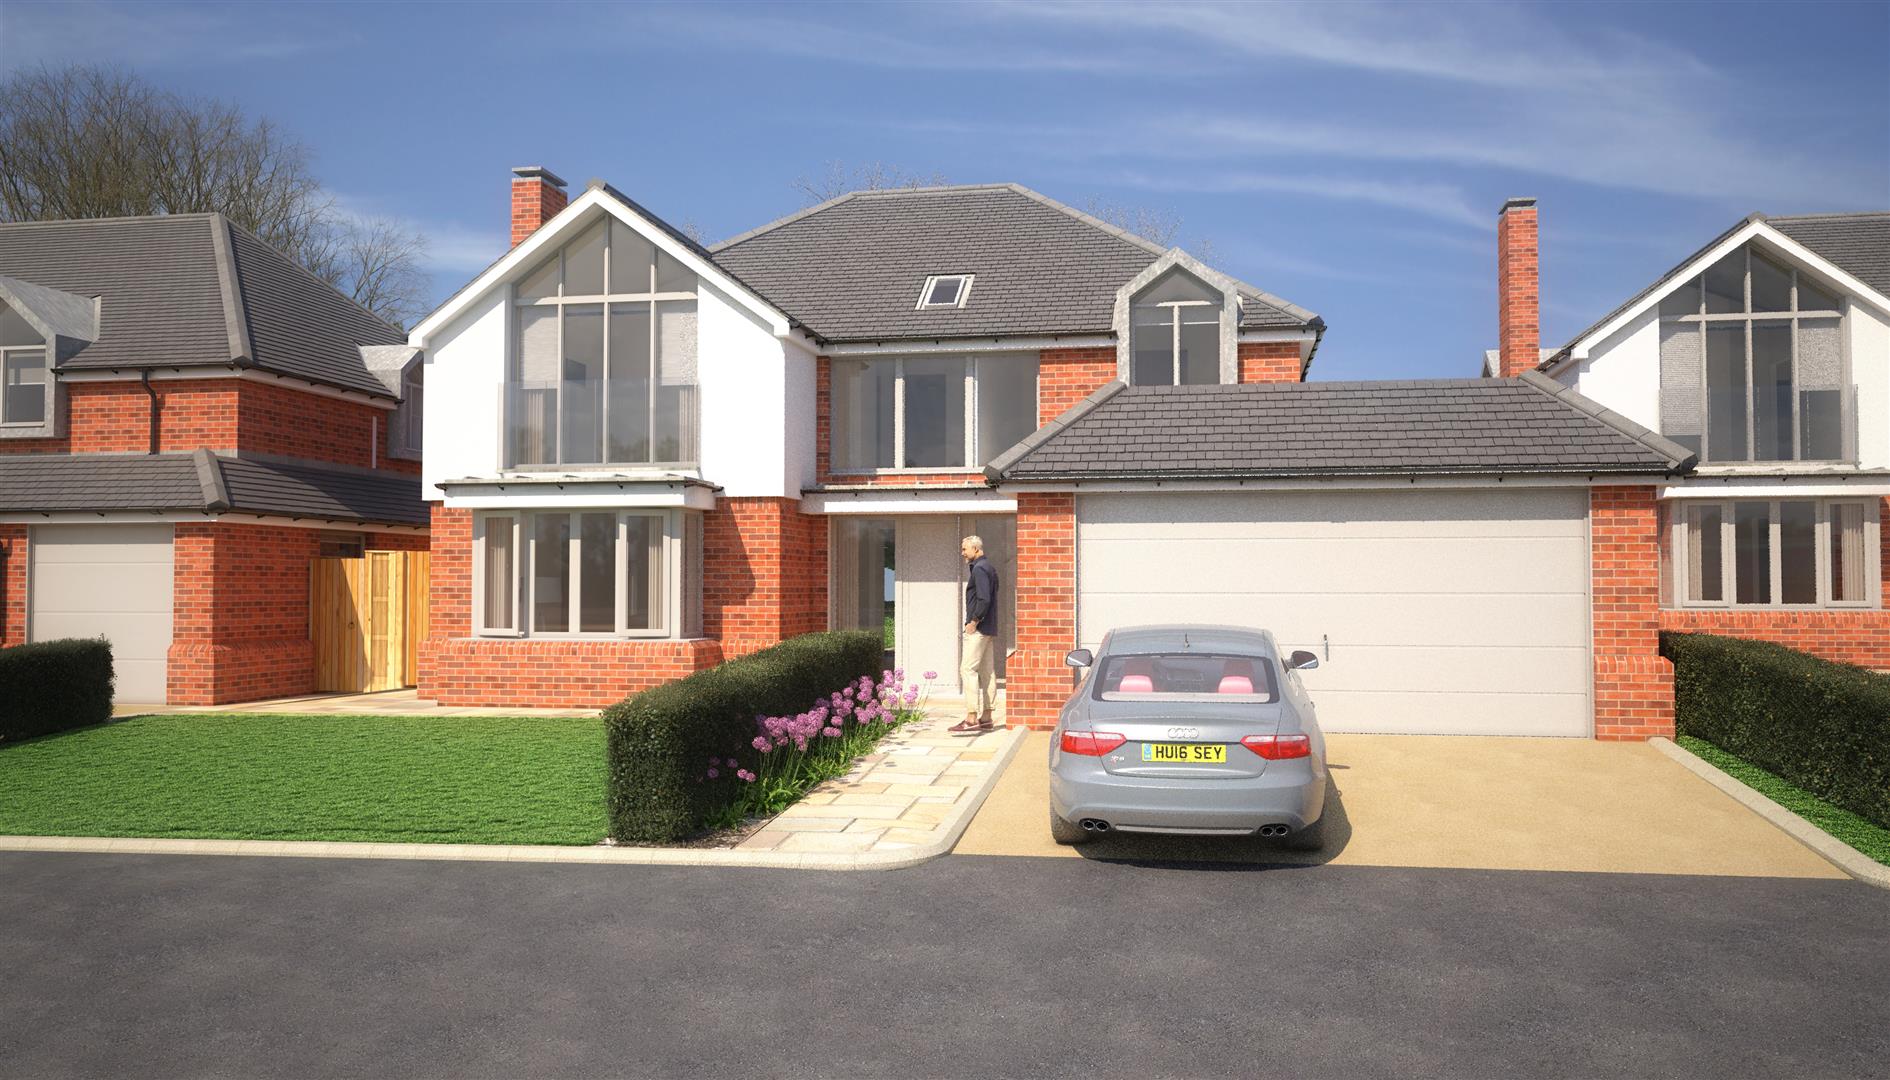 5 bed detached house for sale in Plot 2 Engine Pool Views, Wood Lane, Solihull - Property Image 1